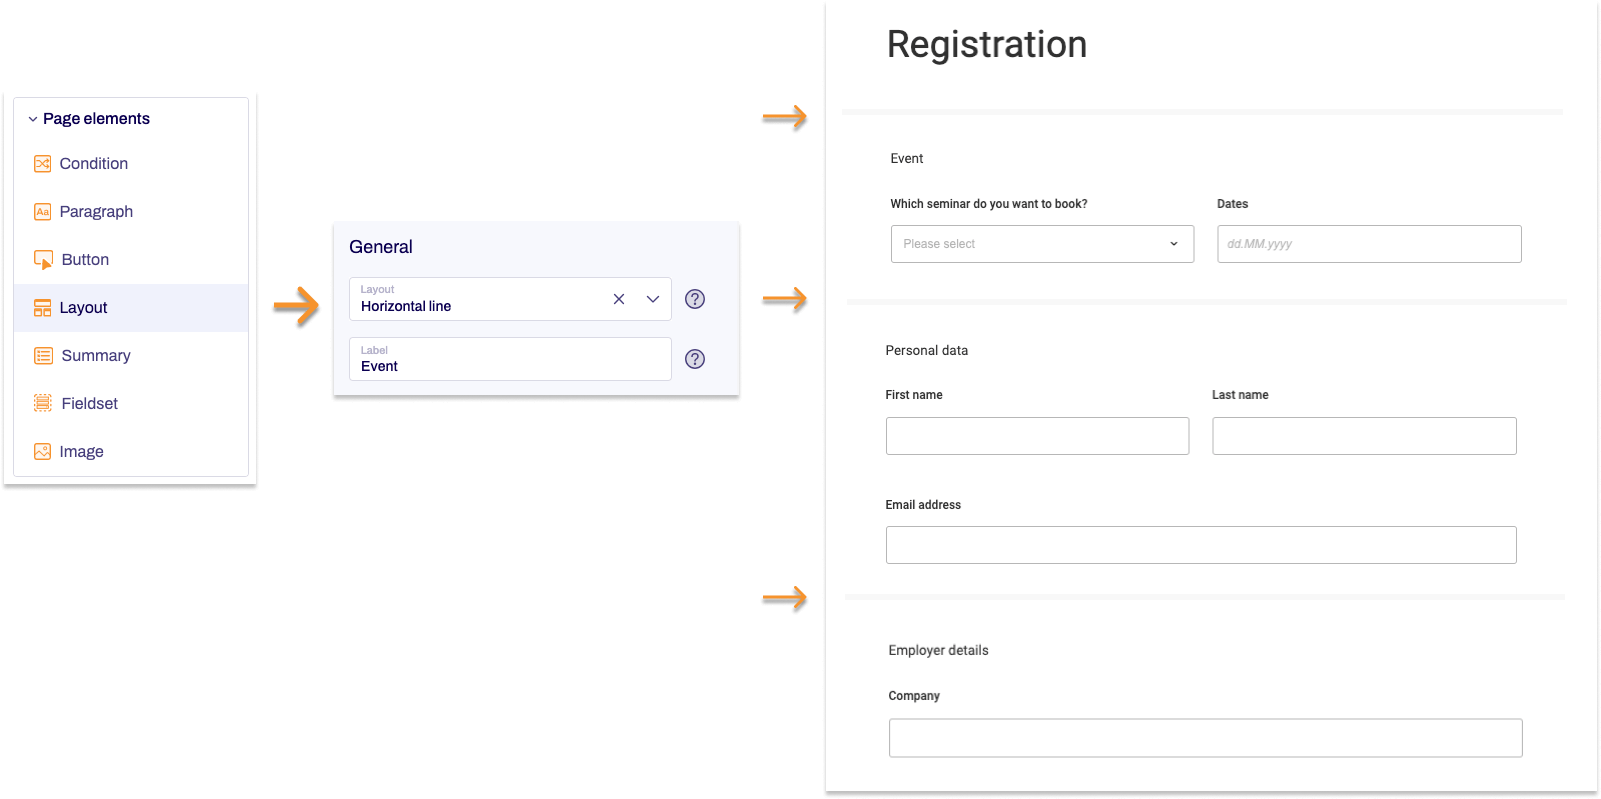 The form element layout is presented using the horizontal separator line as an example.